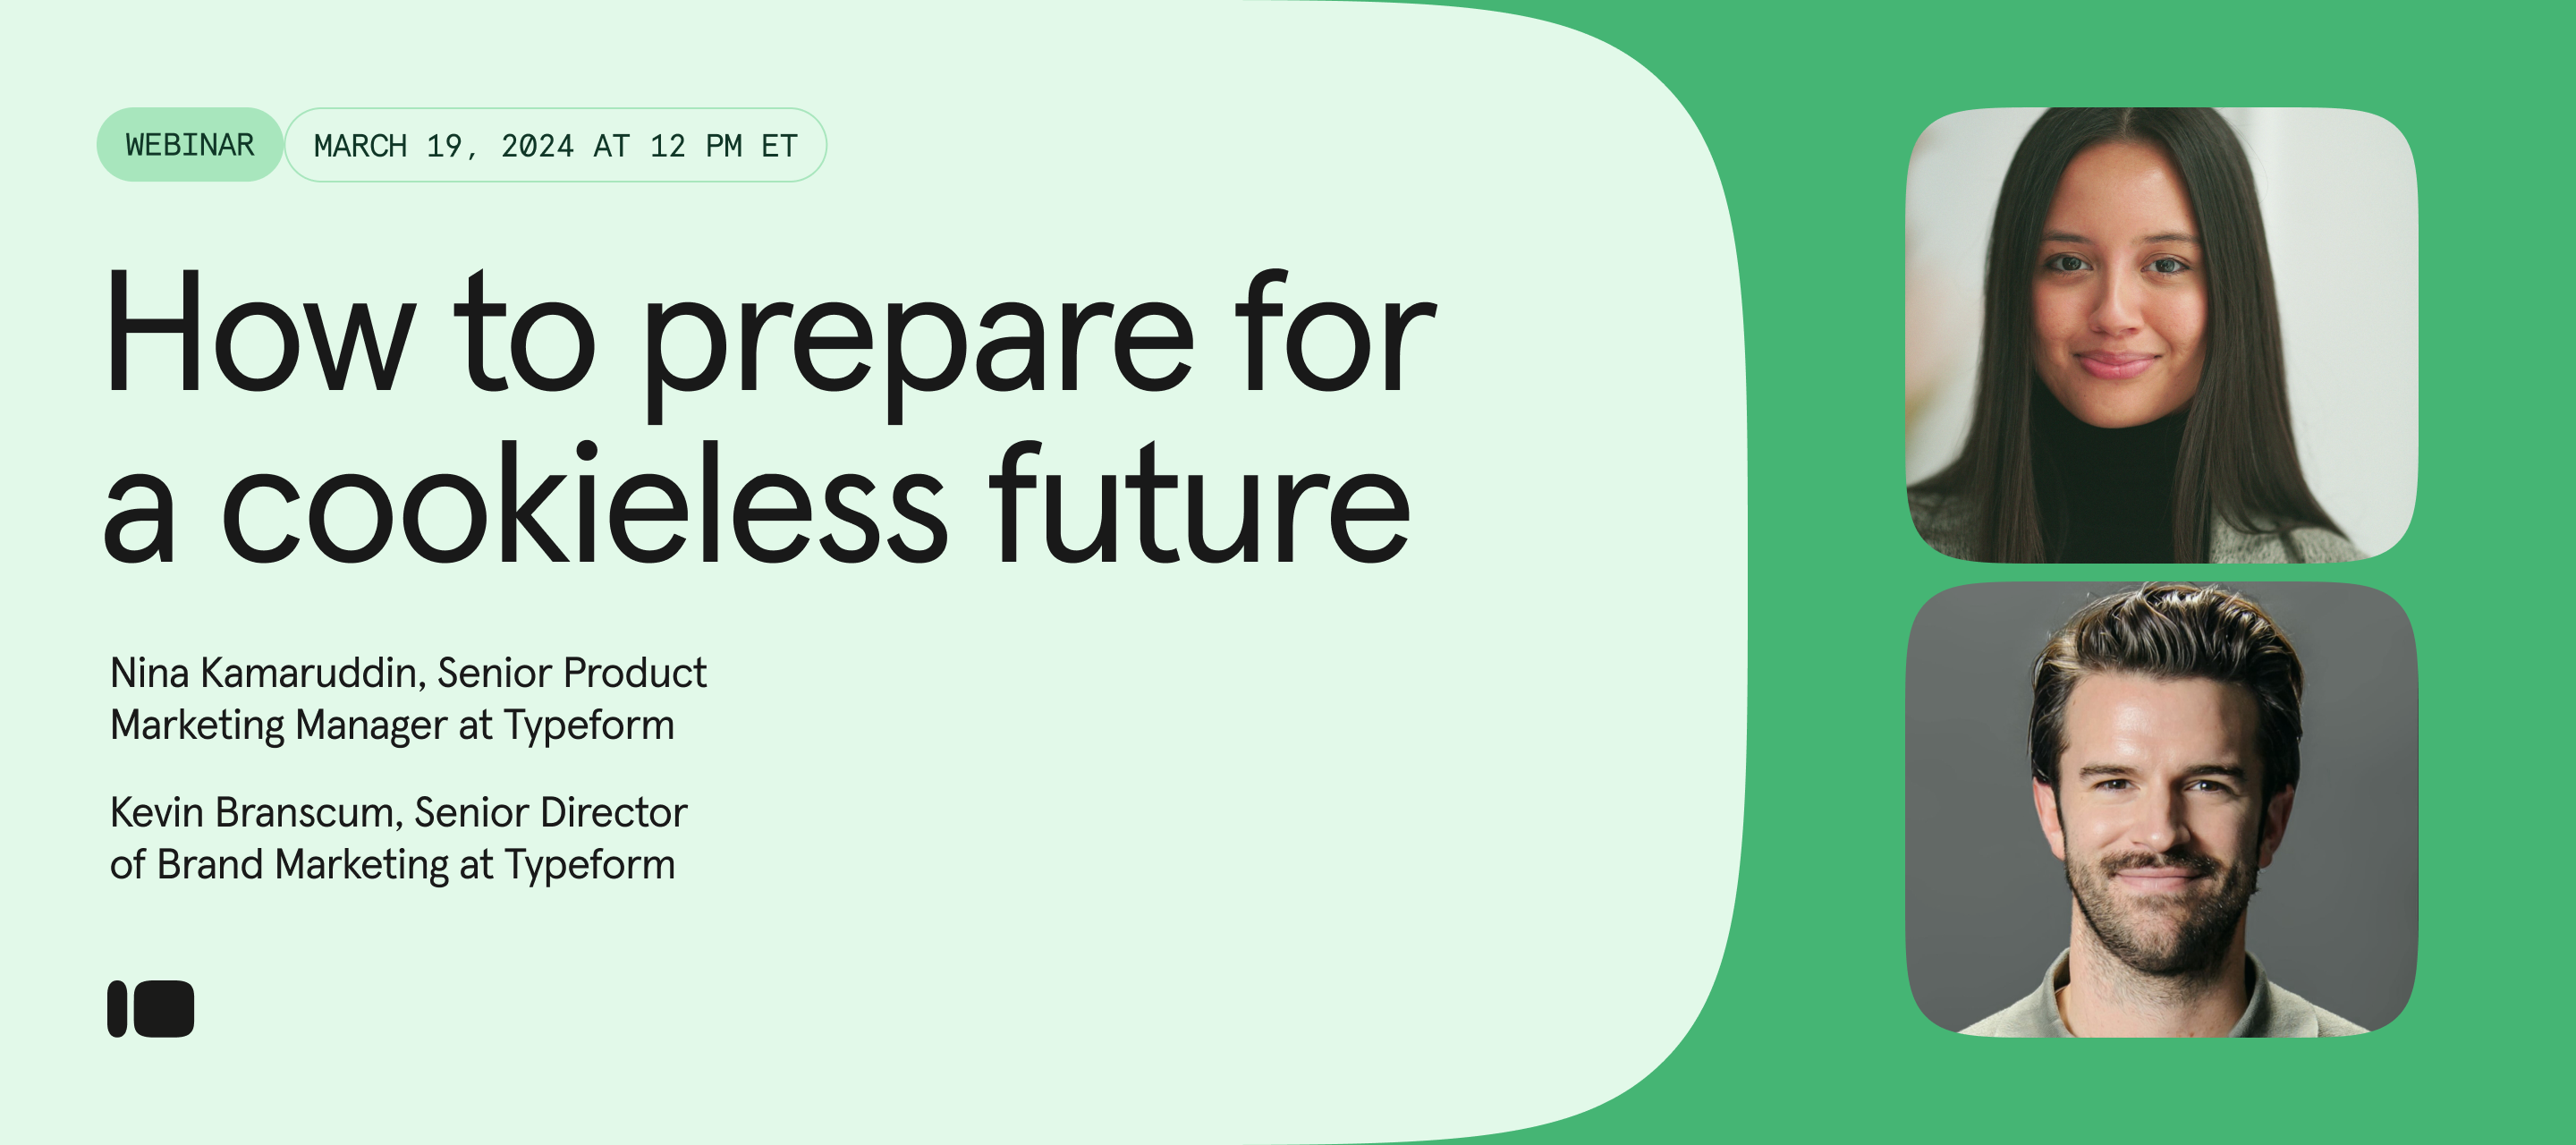 ▶️ Rewatch the webinar: How to prepare for a cookieless future 🍪